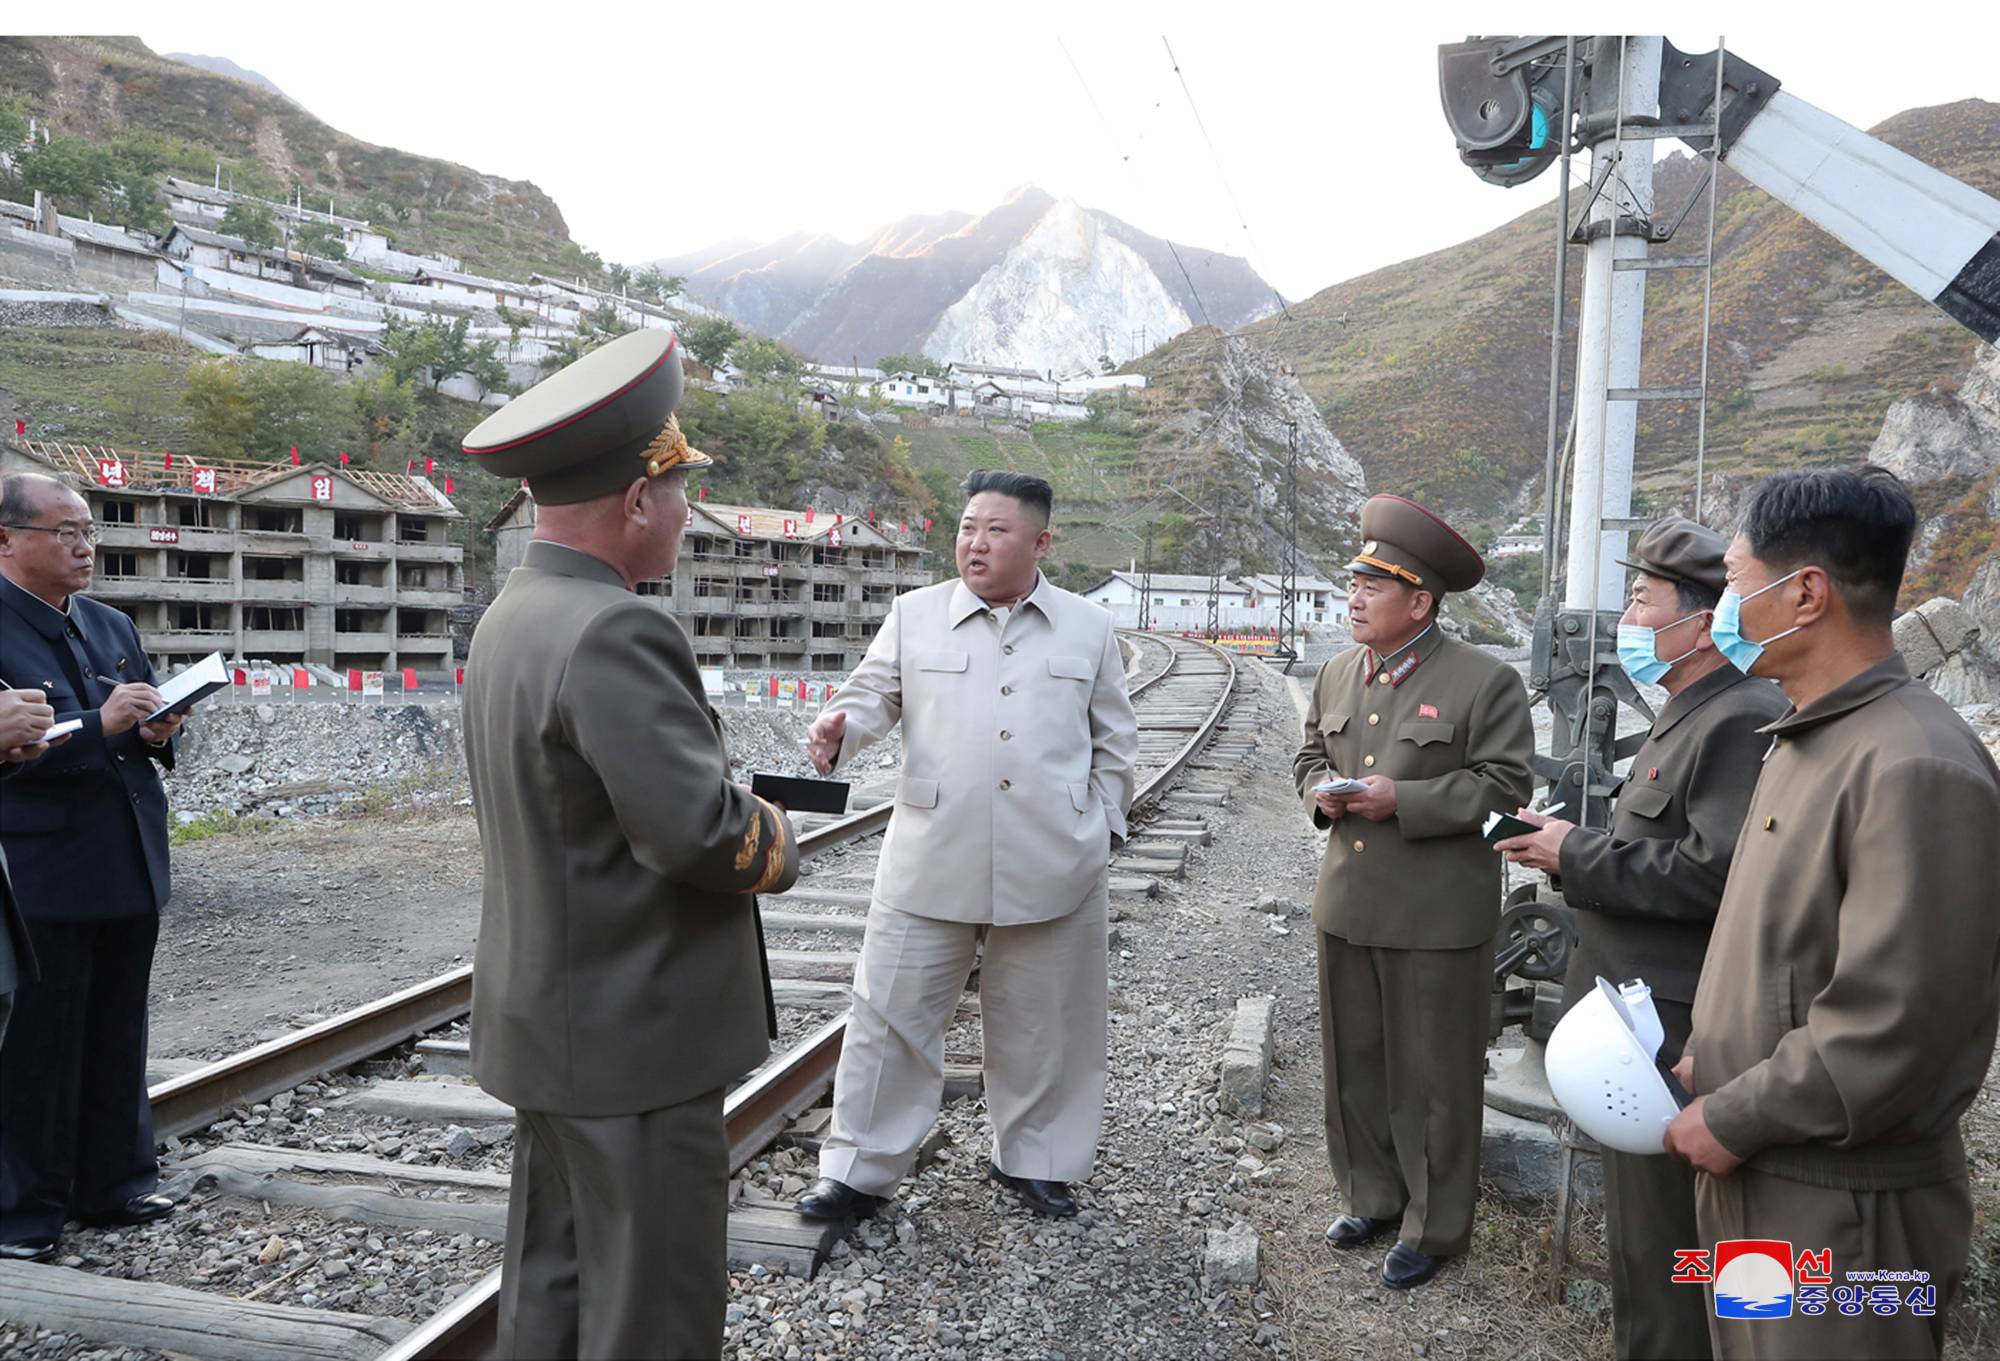 North Korean leader Kim Jong Un inspects a damage recovery site affected by heavy rains and winds caused by recent typhoons in South Hamgyong province in a photo released Tuesday.  | KCNA / VIA REUTERS